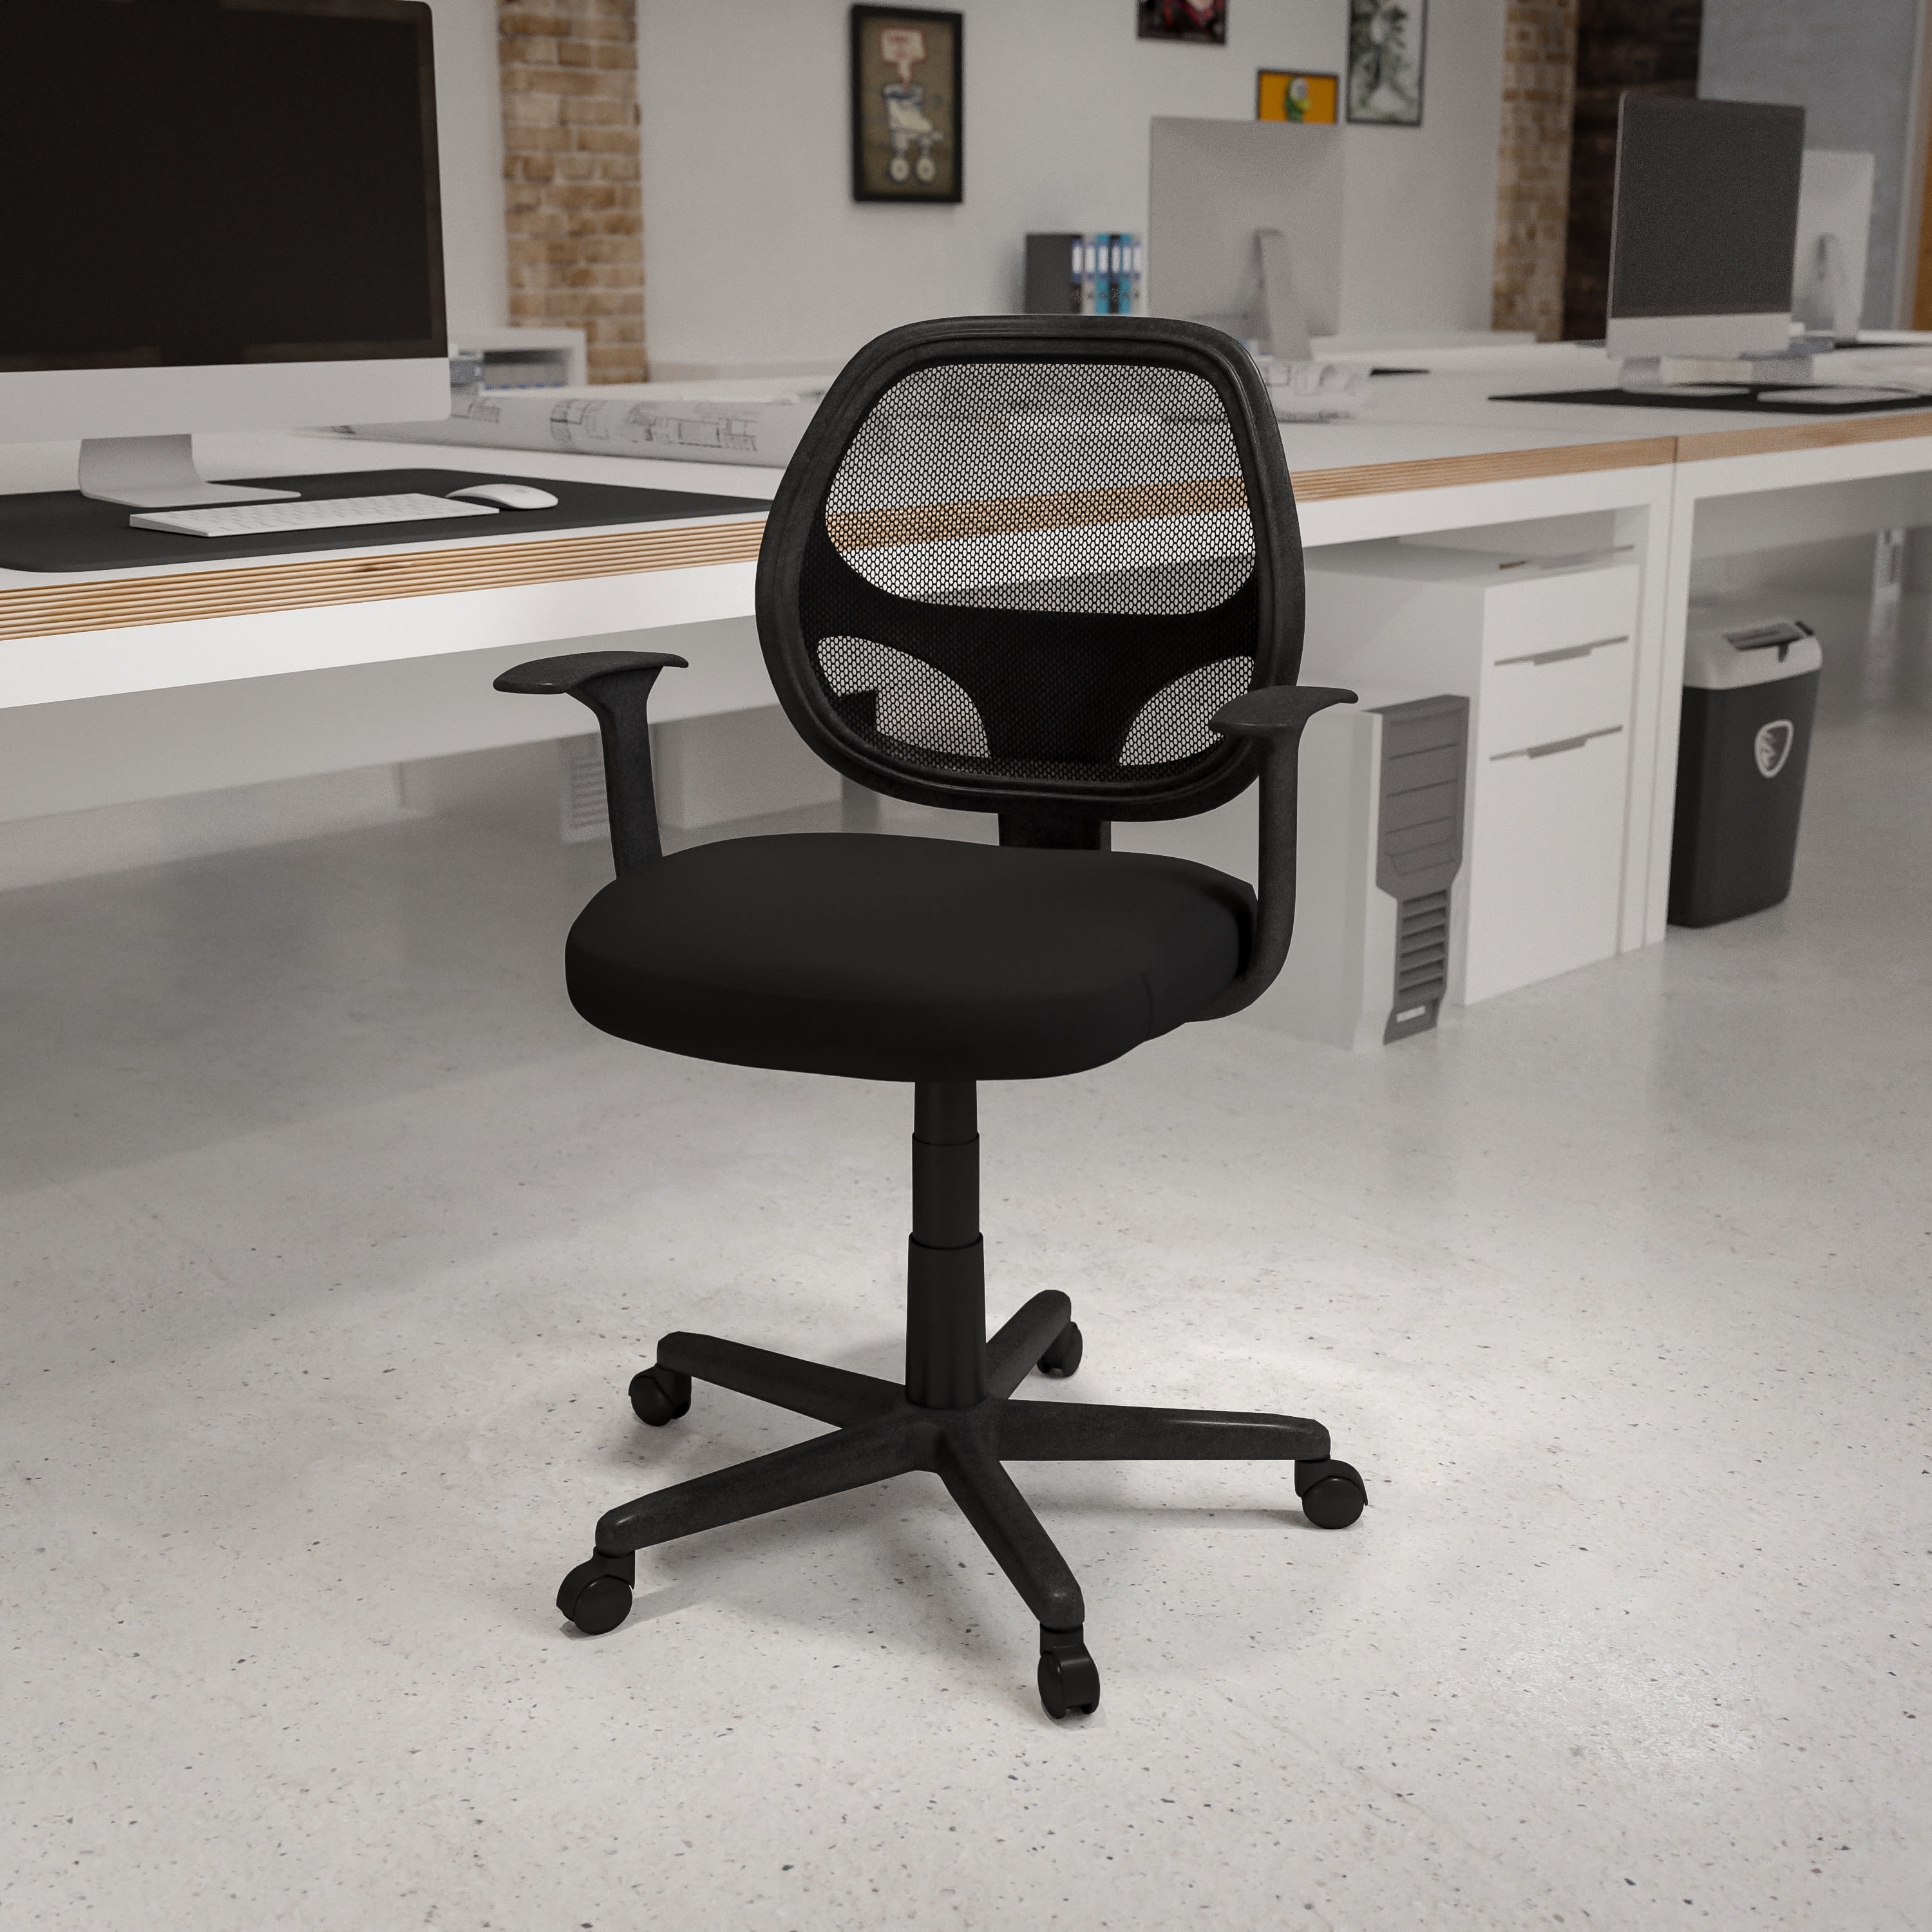 Flash Furniture Mid-back Blue Mesh Office Task Chair With Chrome Finished Base for sale online 